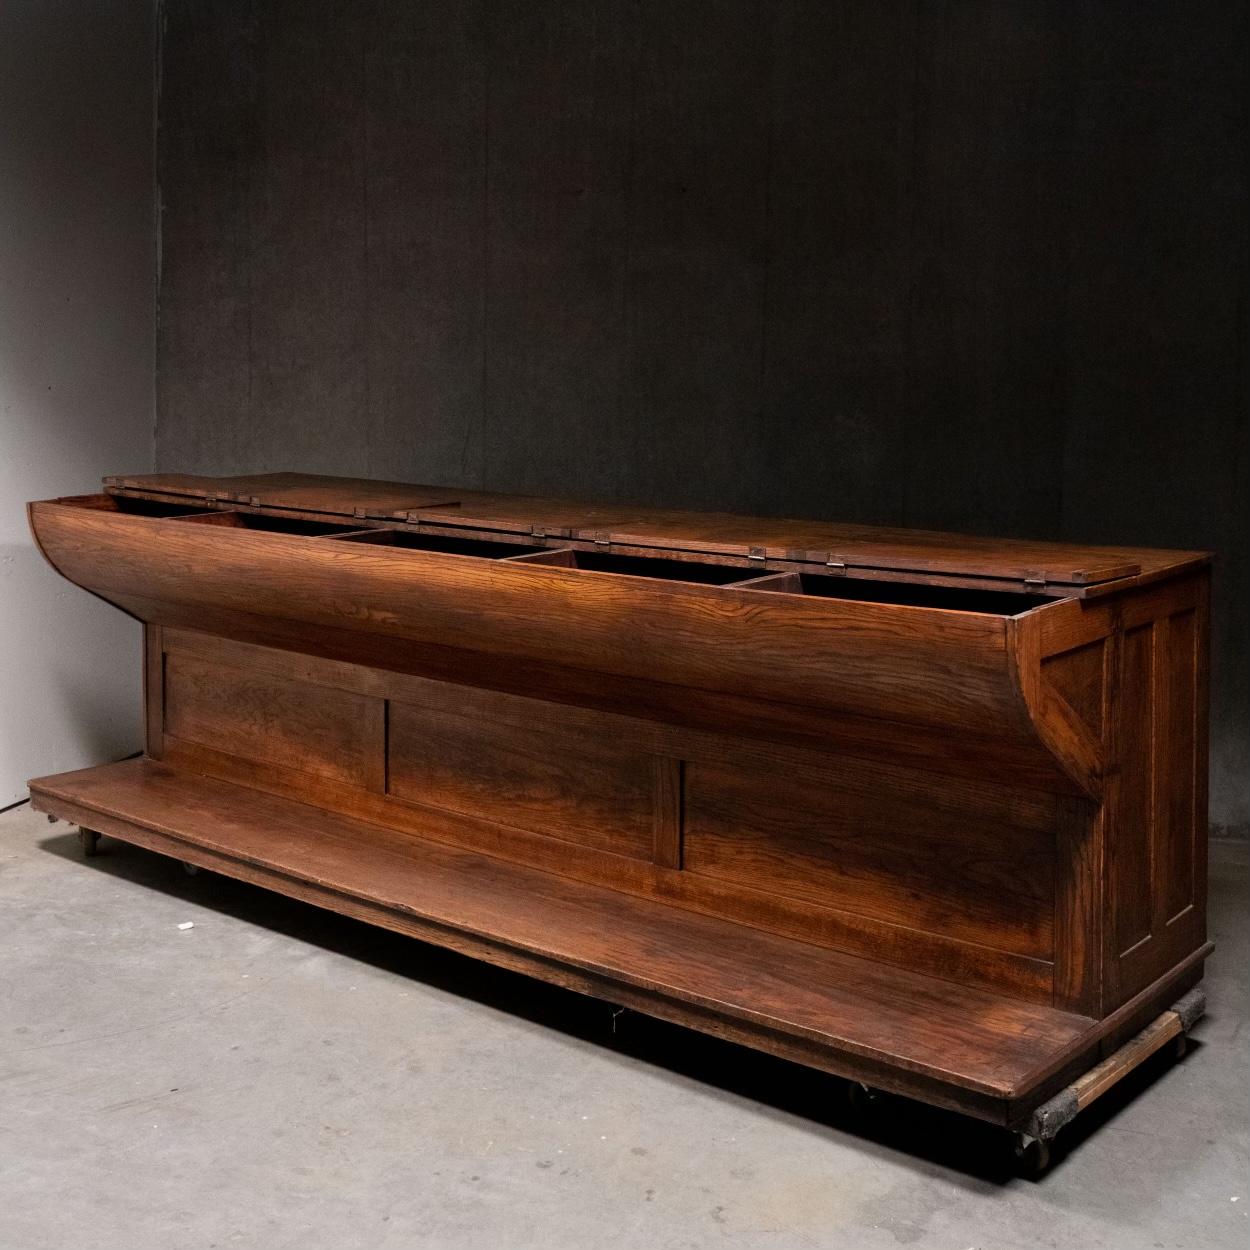 1890 Oak Mercantile Counter / Sorting Bin In Good Condition For Sale In Surrey, BC